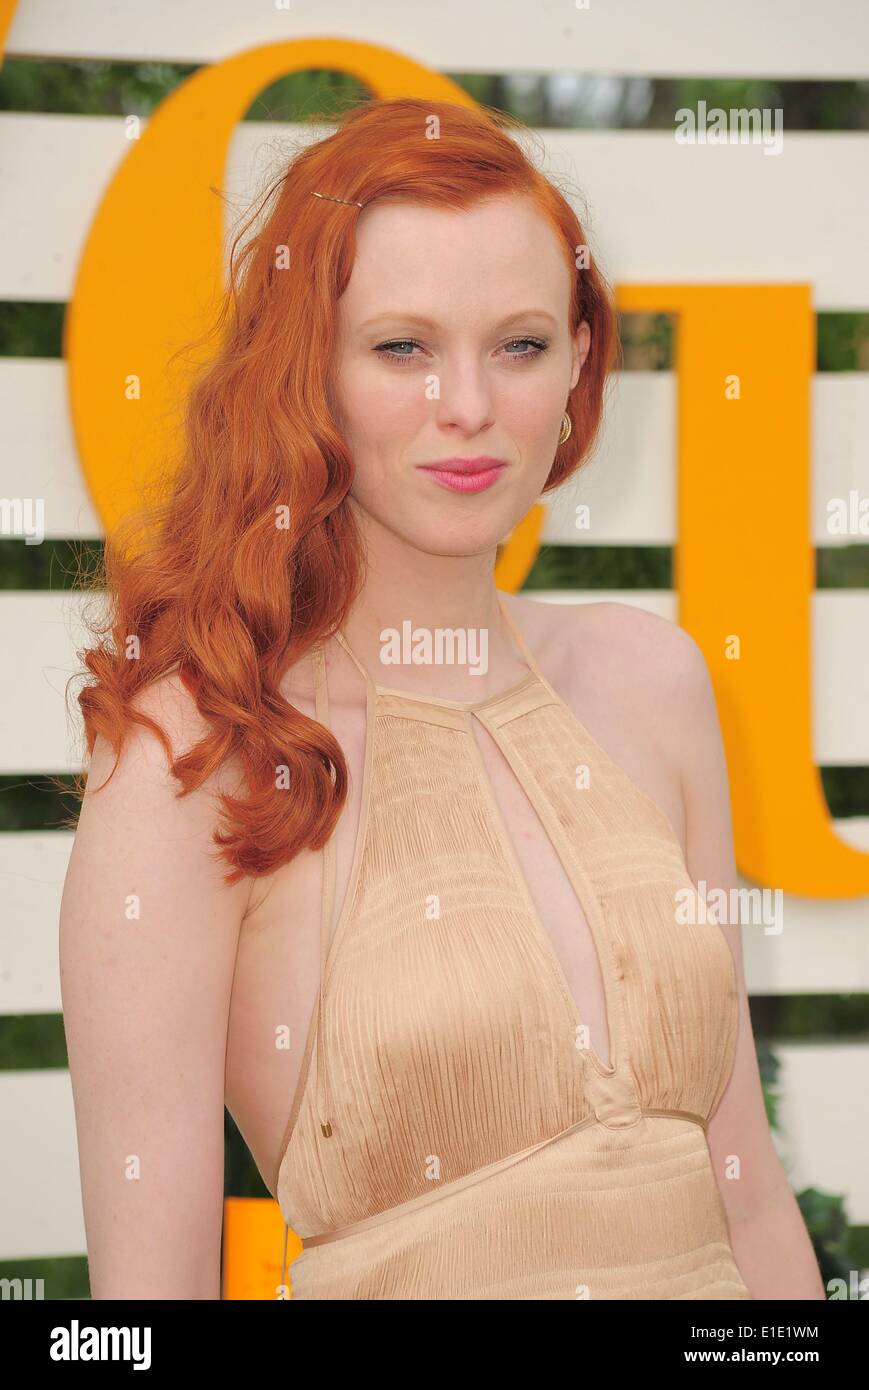 New York, NY, USA. 31st May, 2014. Karen Elson in attendance for 2014 Veuve Clicquot Polo Classic, Liberty State Park, New York, NY May 31, 2014. Credit:  Gregorio T. Binuya/Everett Collection/Alamy Live News Stock Photo